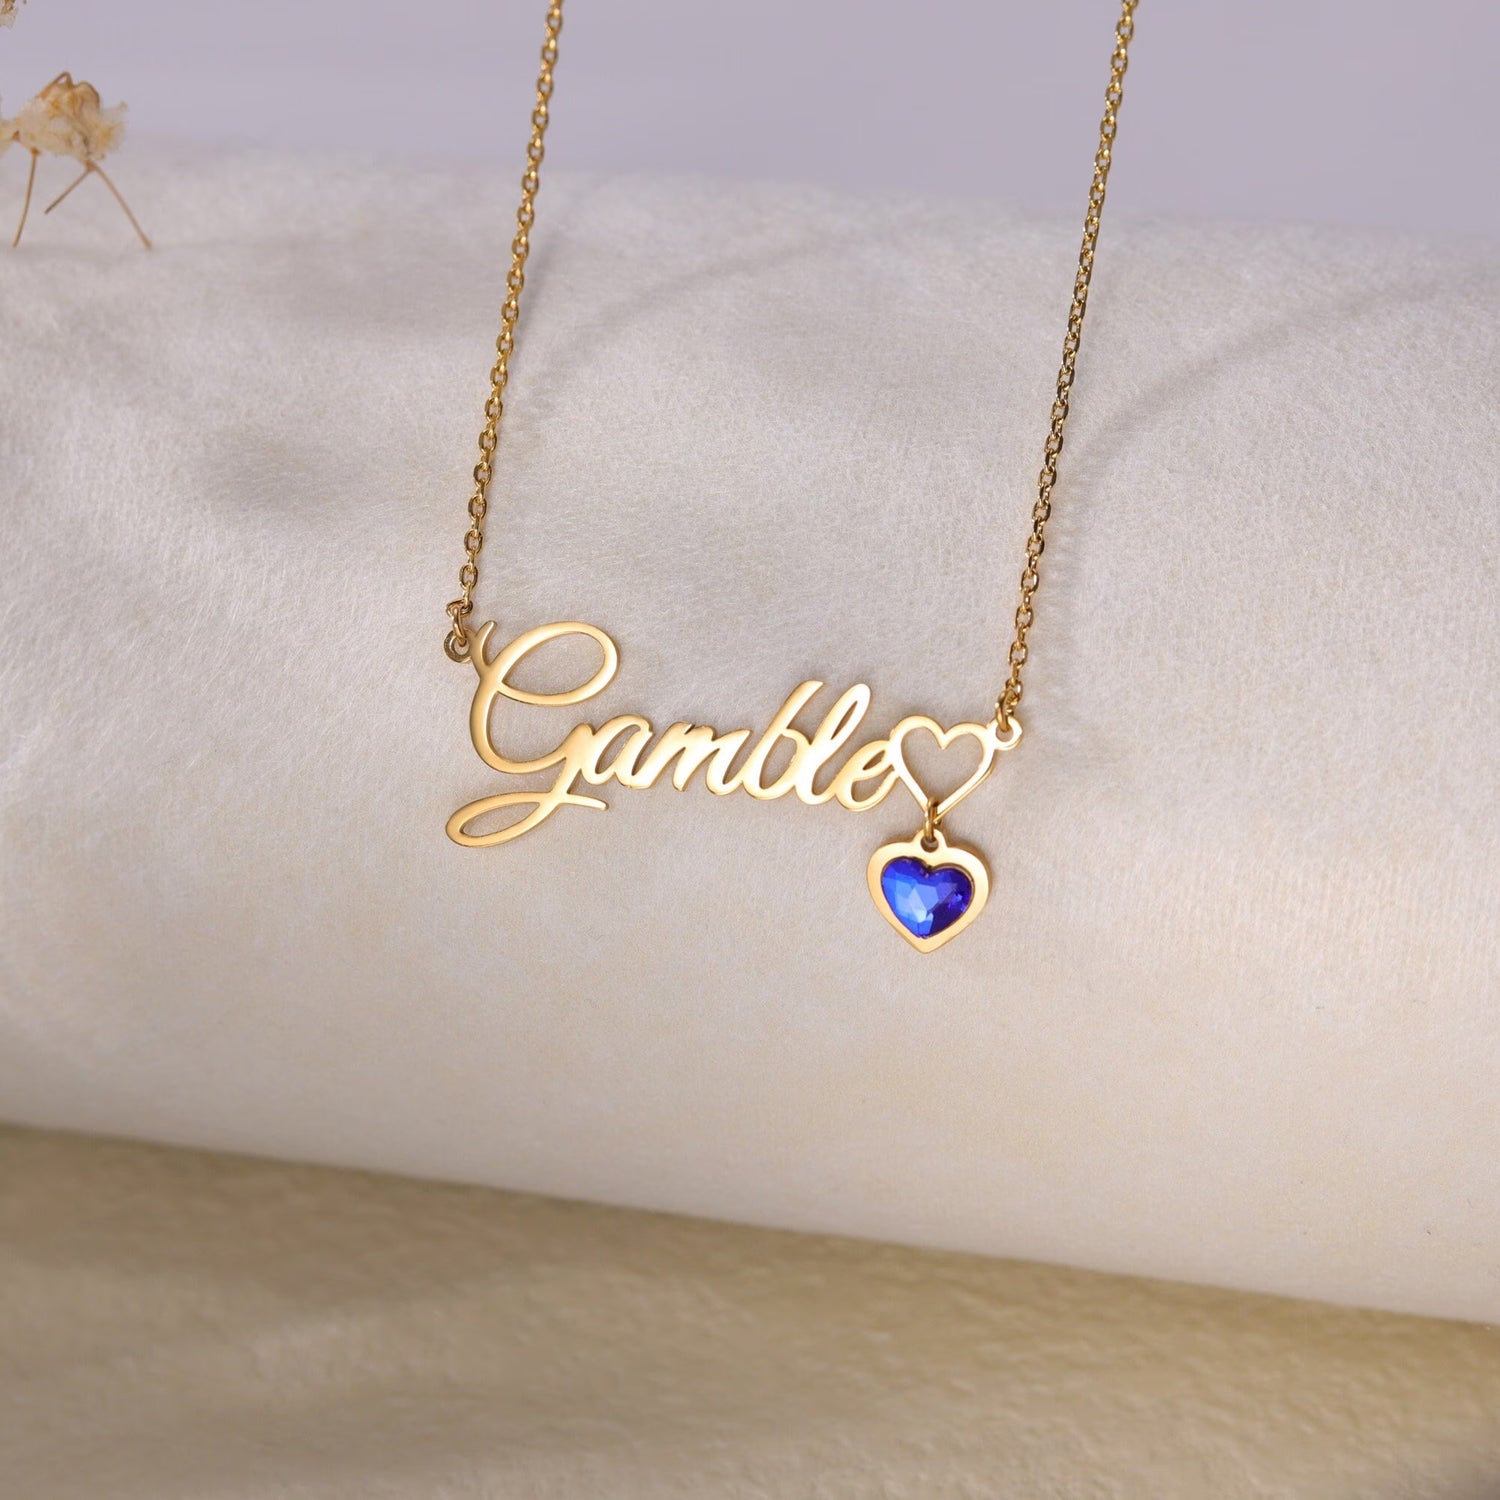 Personalized Gold Necklace: Perfect Gifts for Sisters